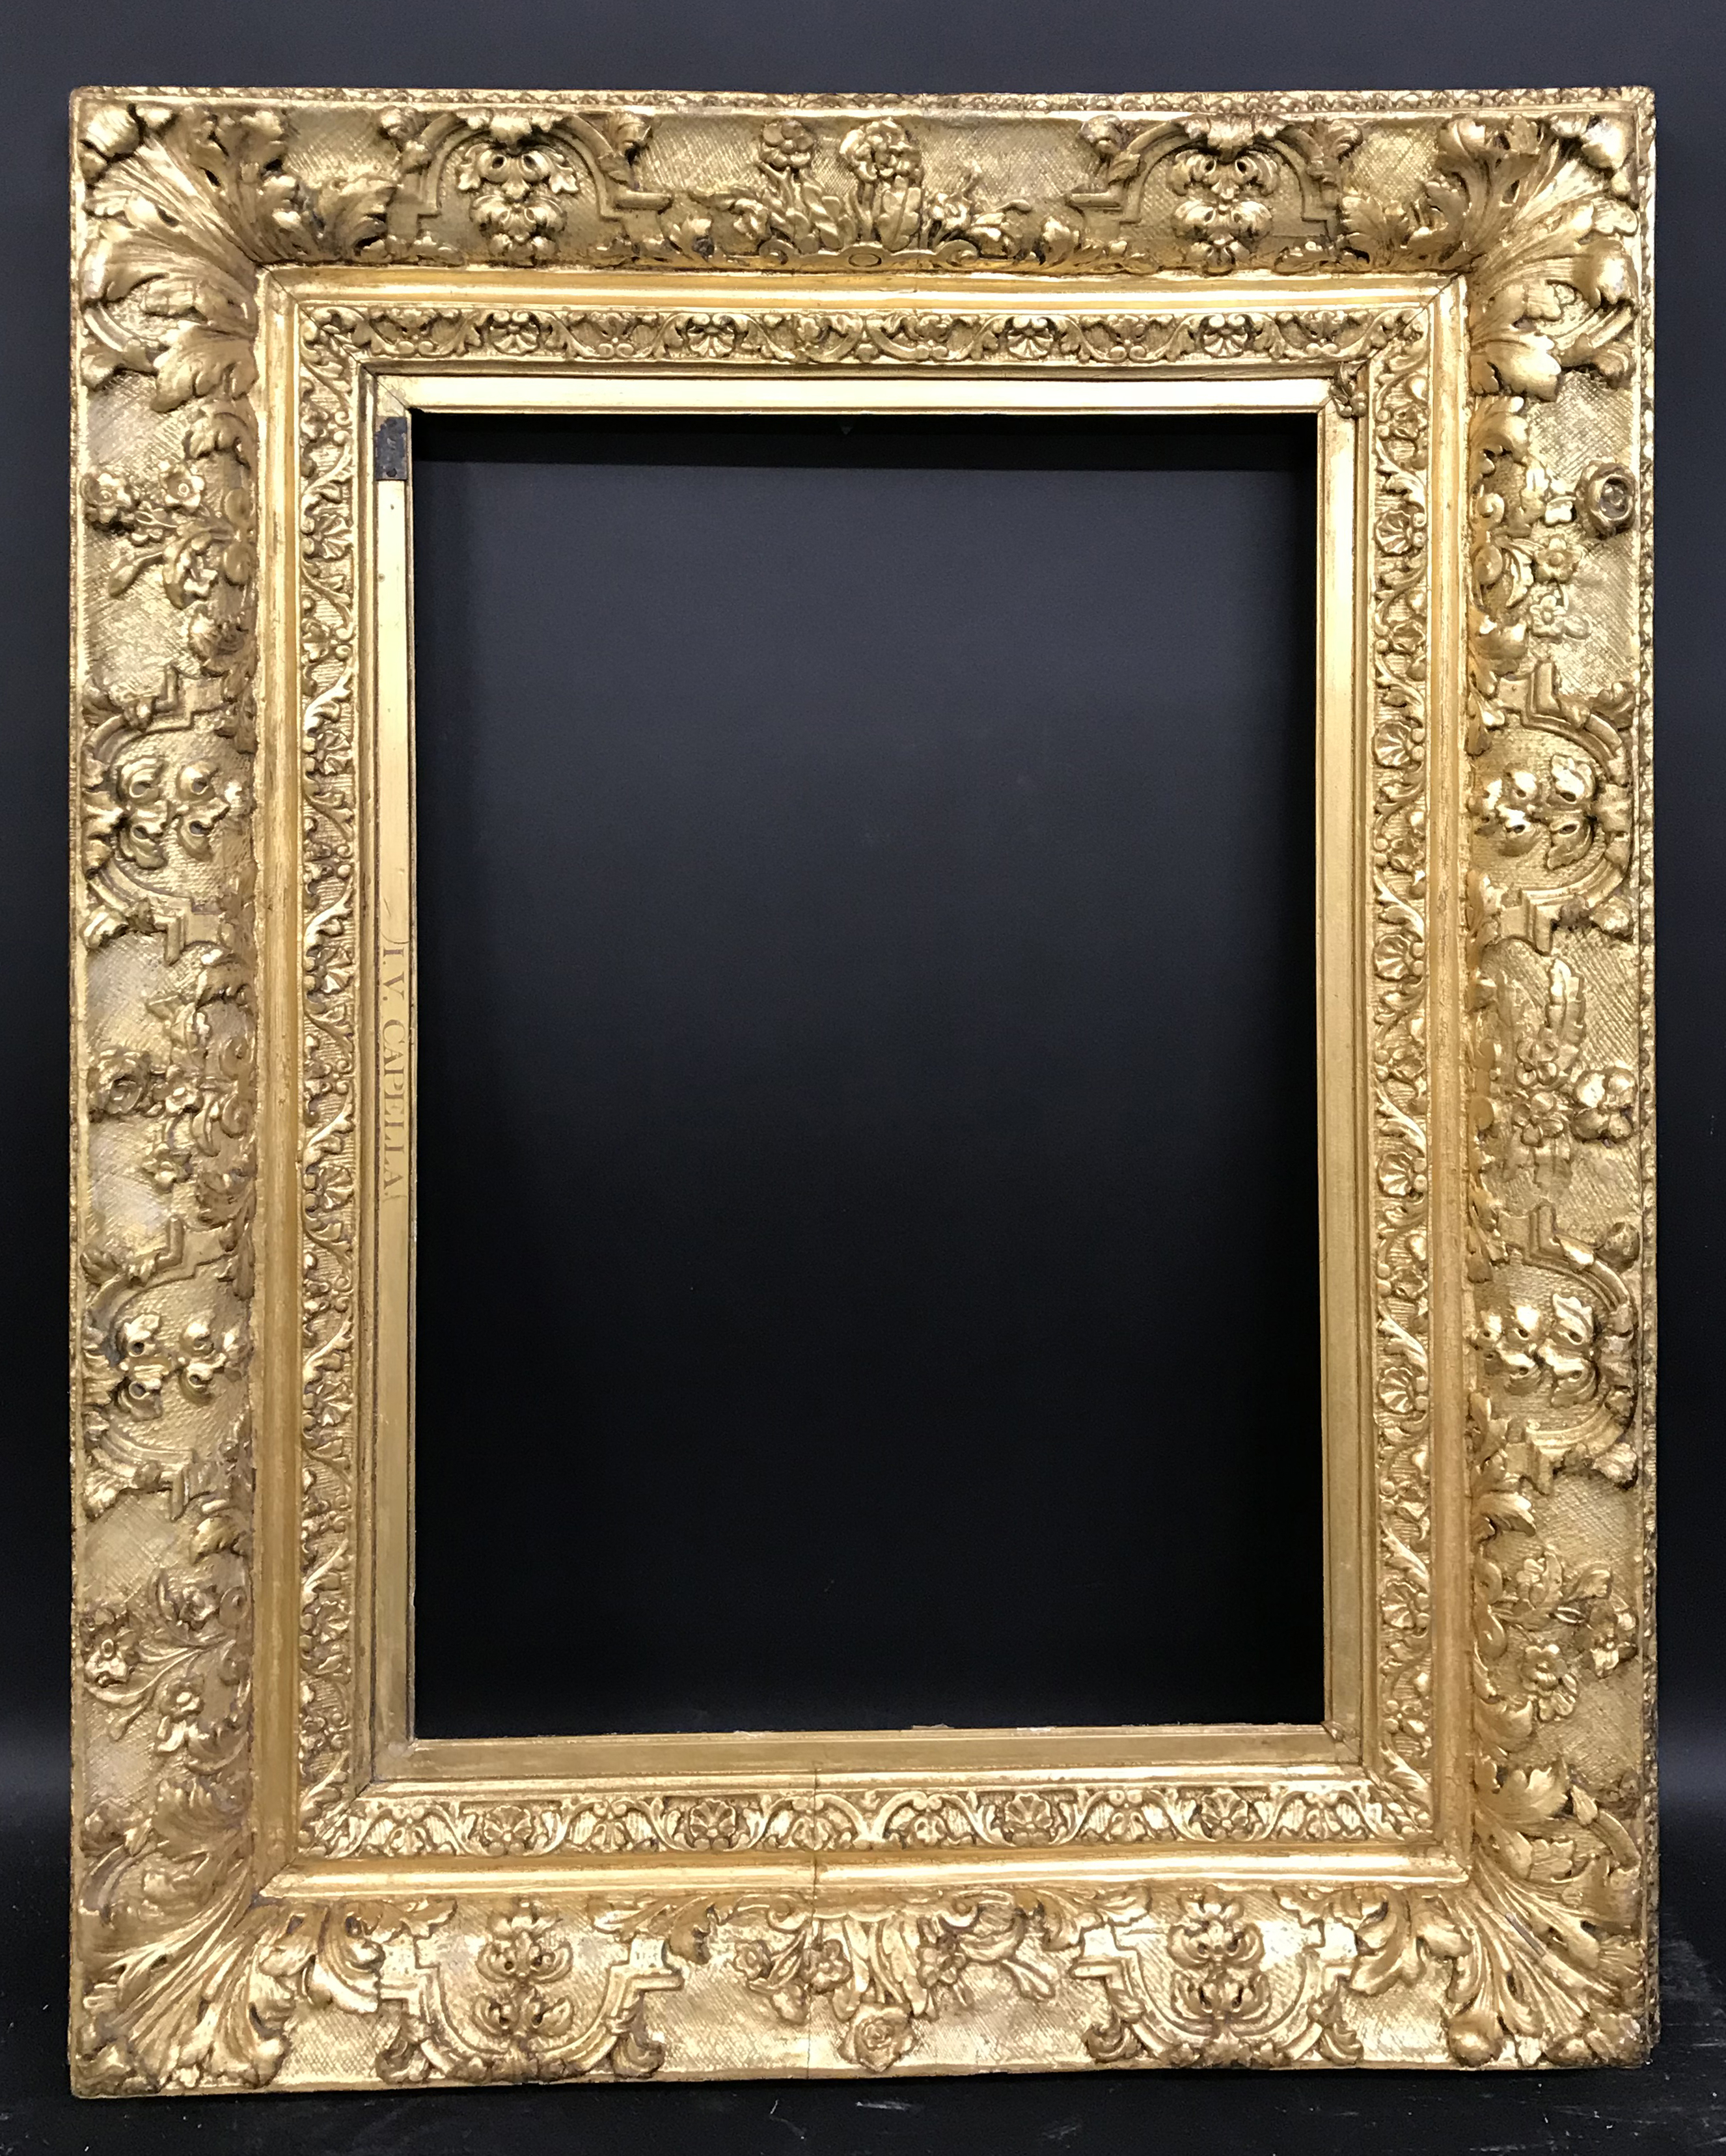 19th Century English School. A Carved Giltwood Frame, 20" x 13" (rebate). - Image 4 of 5